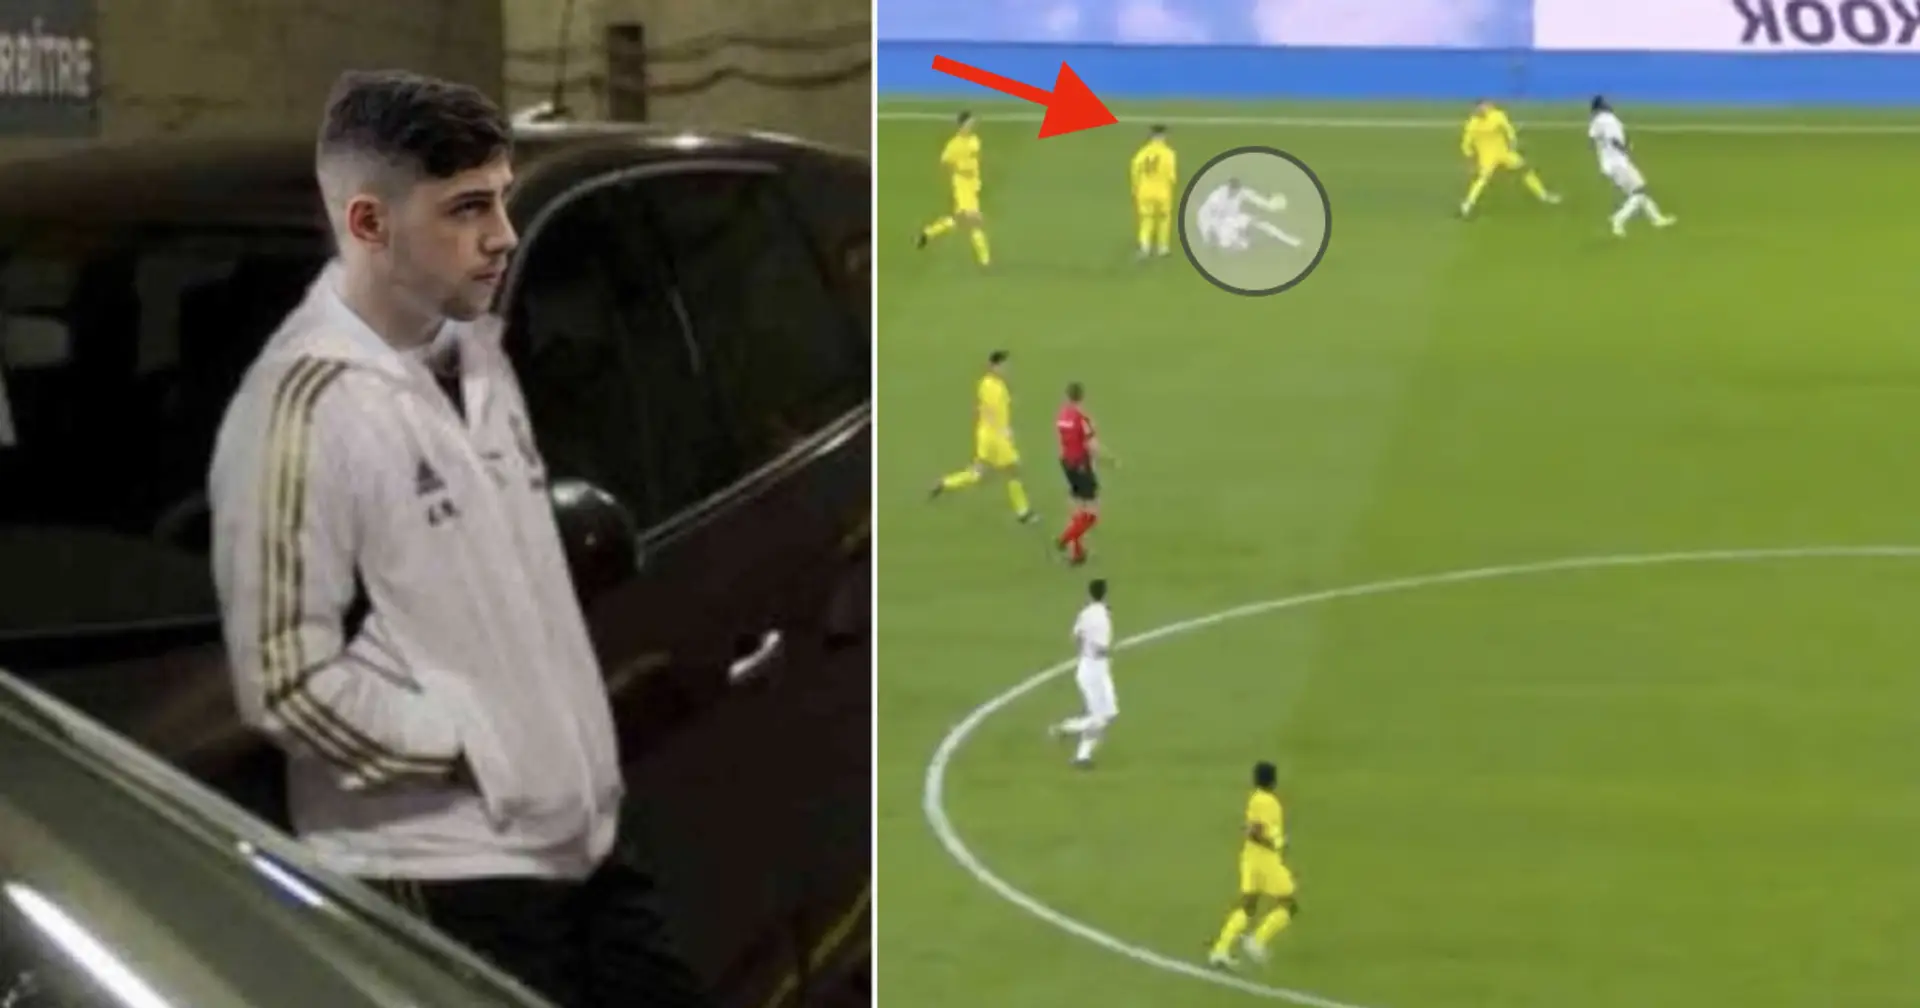 Fede Valverde allegedly punches Villarreal's player in the face after the game - what? Explaining latest drama at Real Madrid